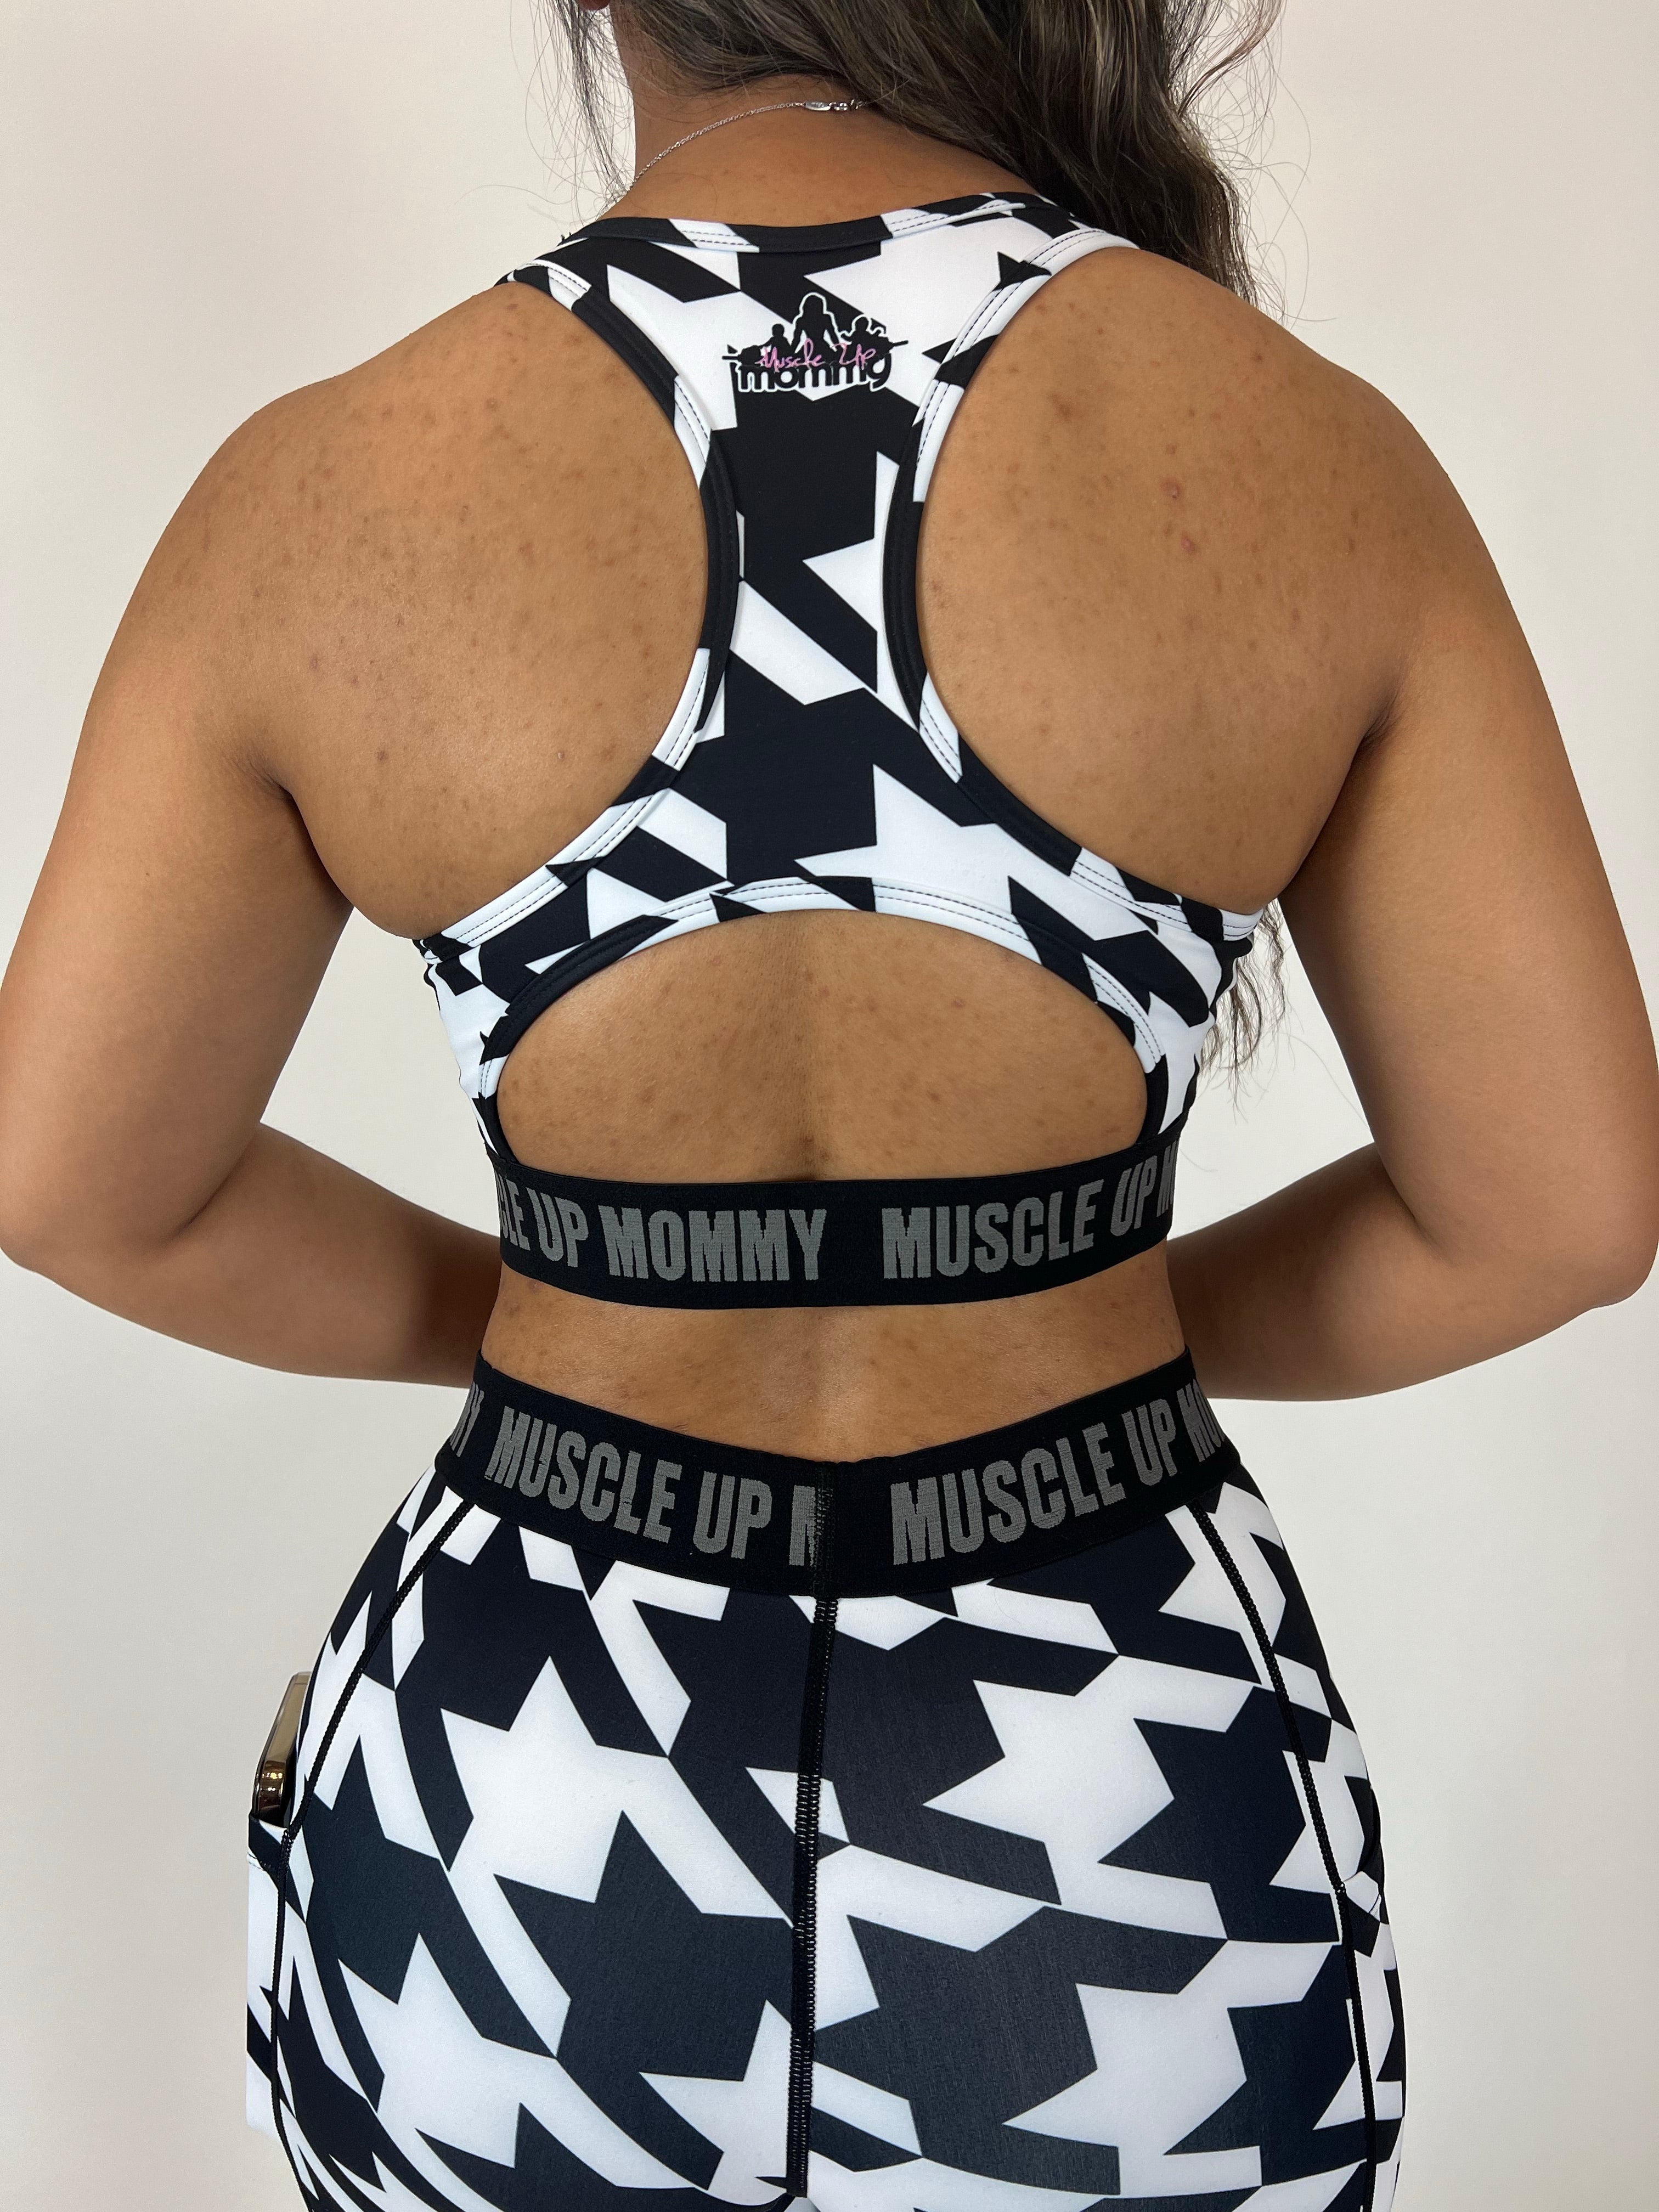 Shop Muscle Up Mommy® Deals, Discounts, and Low Priced Items